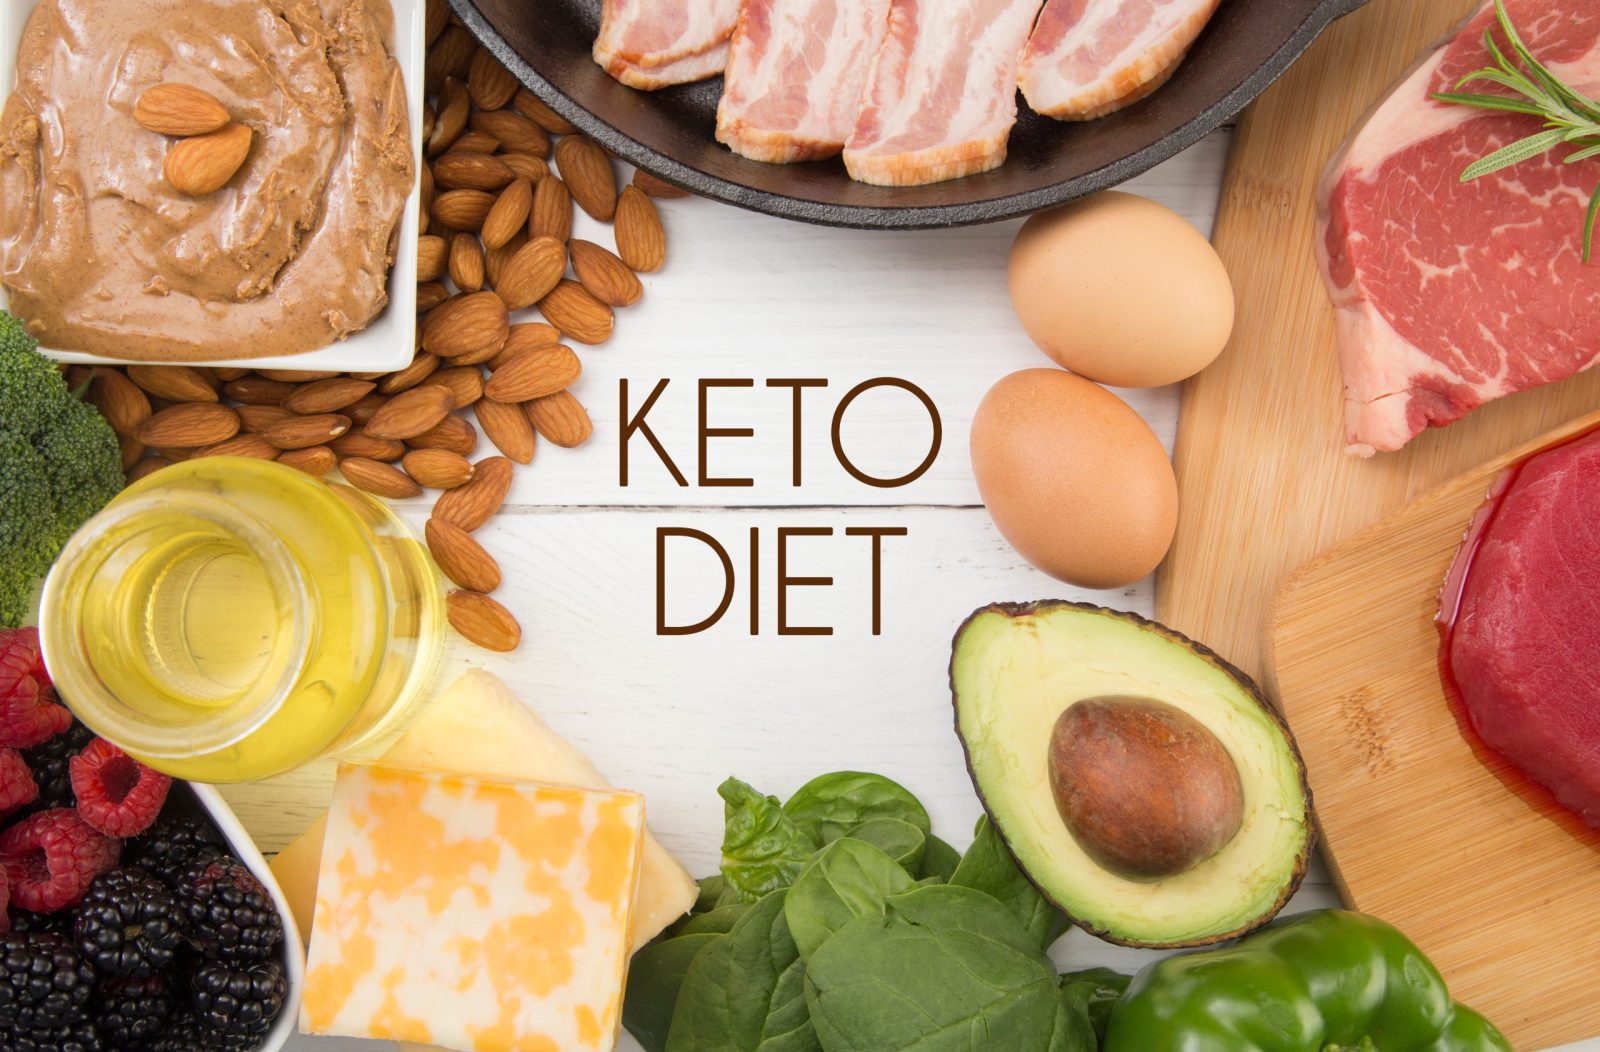 shutterstock_1104380807-scaled-e1678220068498.jpgfit16002C1052ssl1 ‘Keto-like’ Diet May Increase Risk of Heart Disease, According to New Research